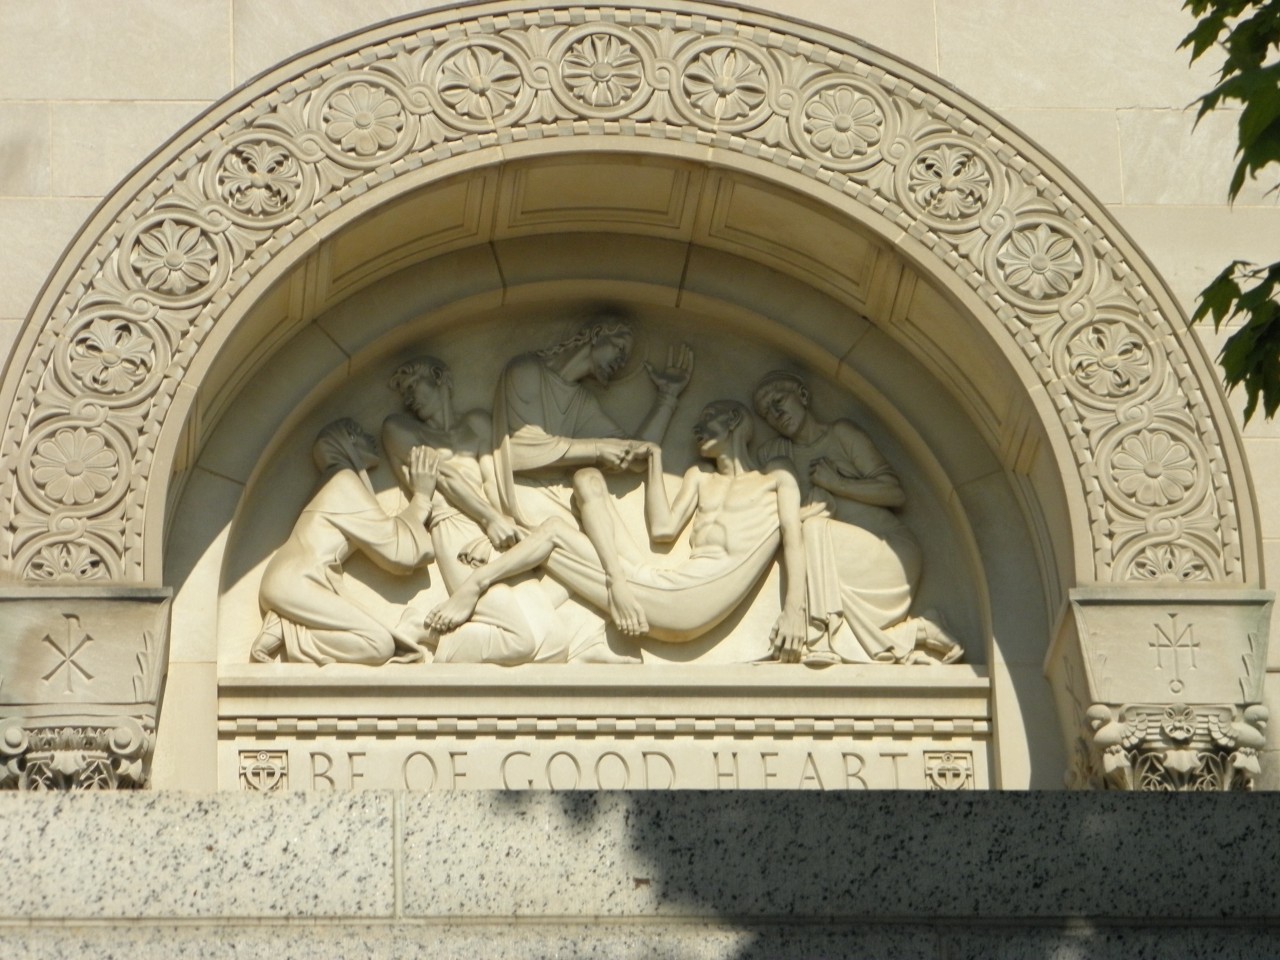 Basilica of the National Shrine – Be of Good Heart